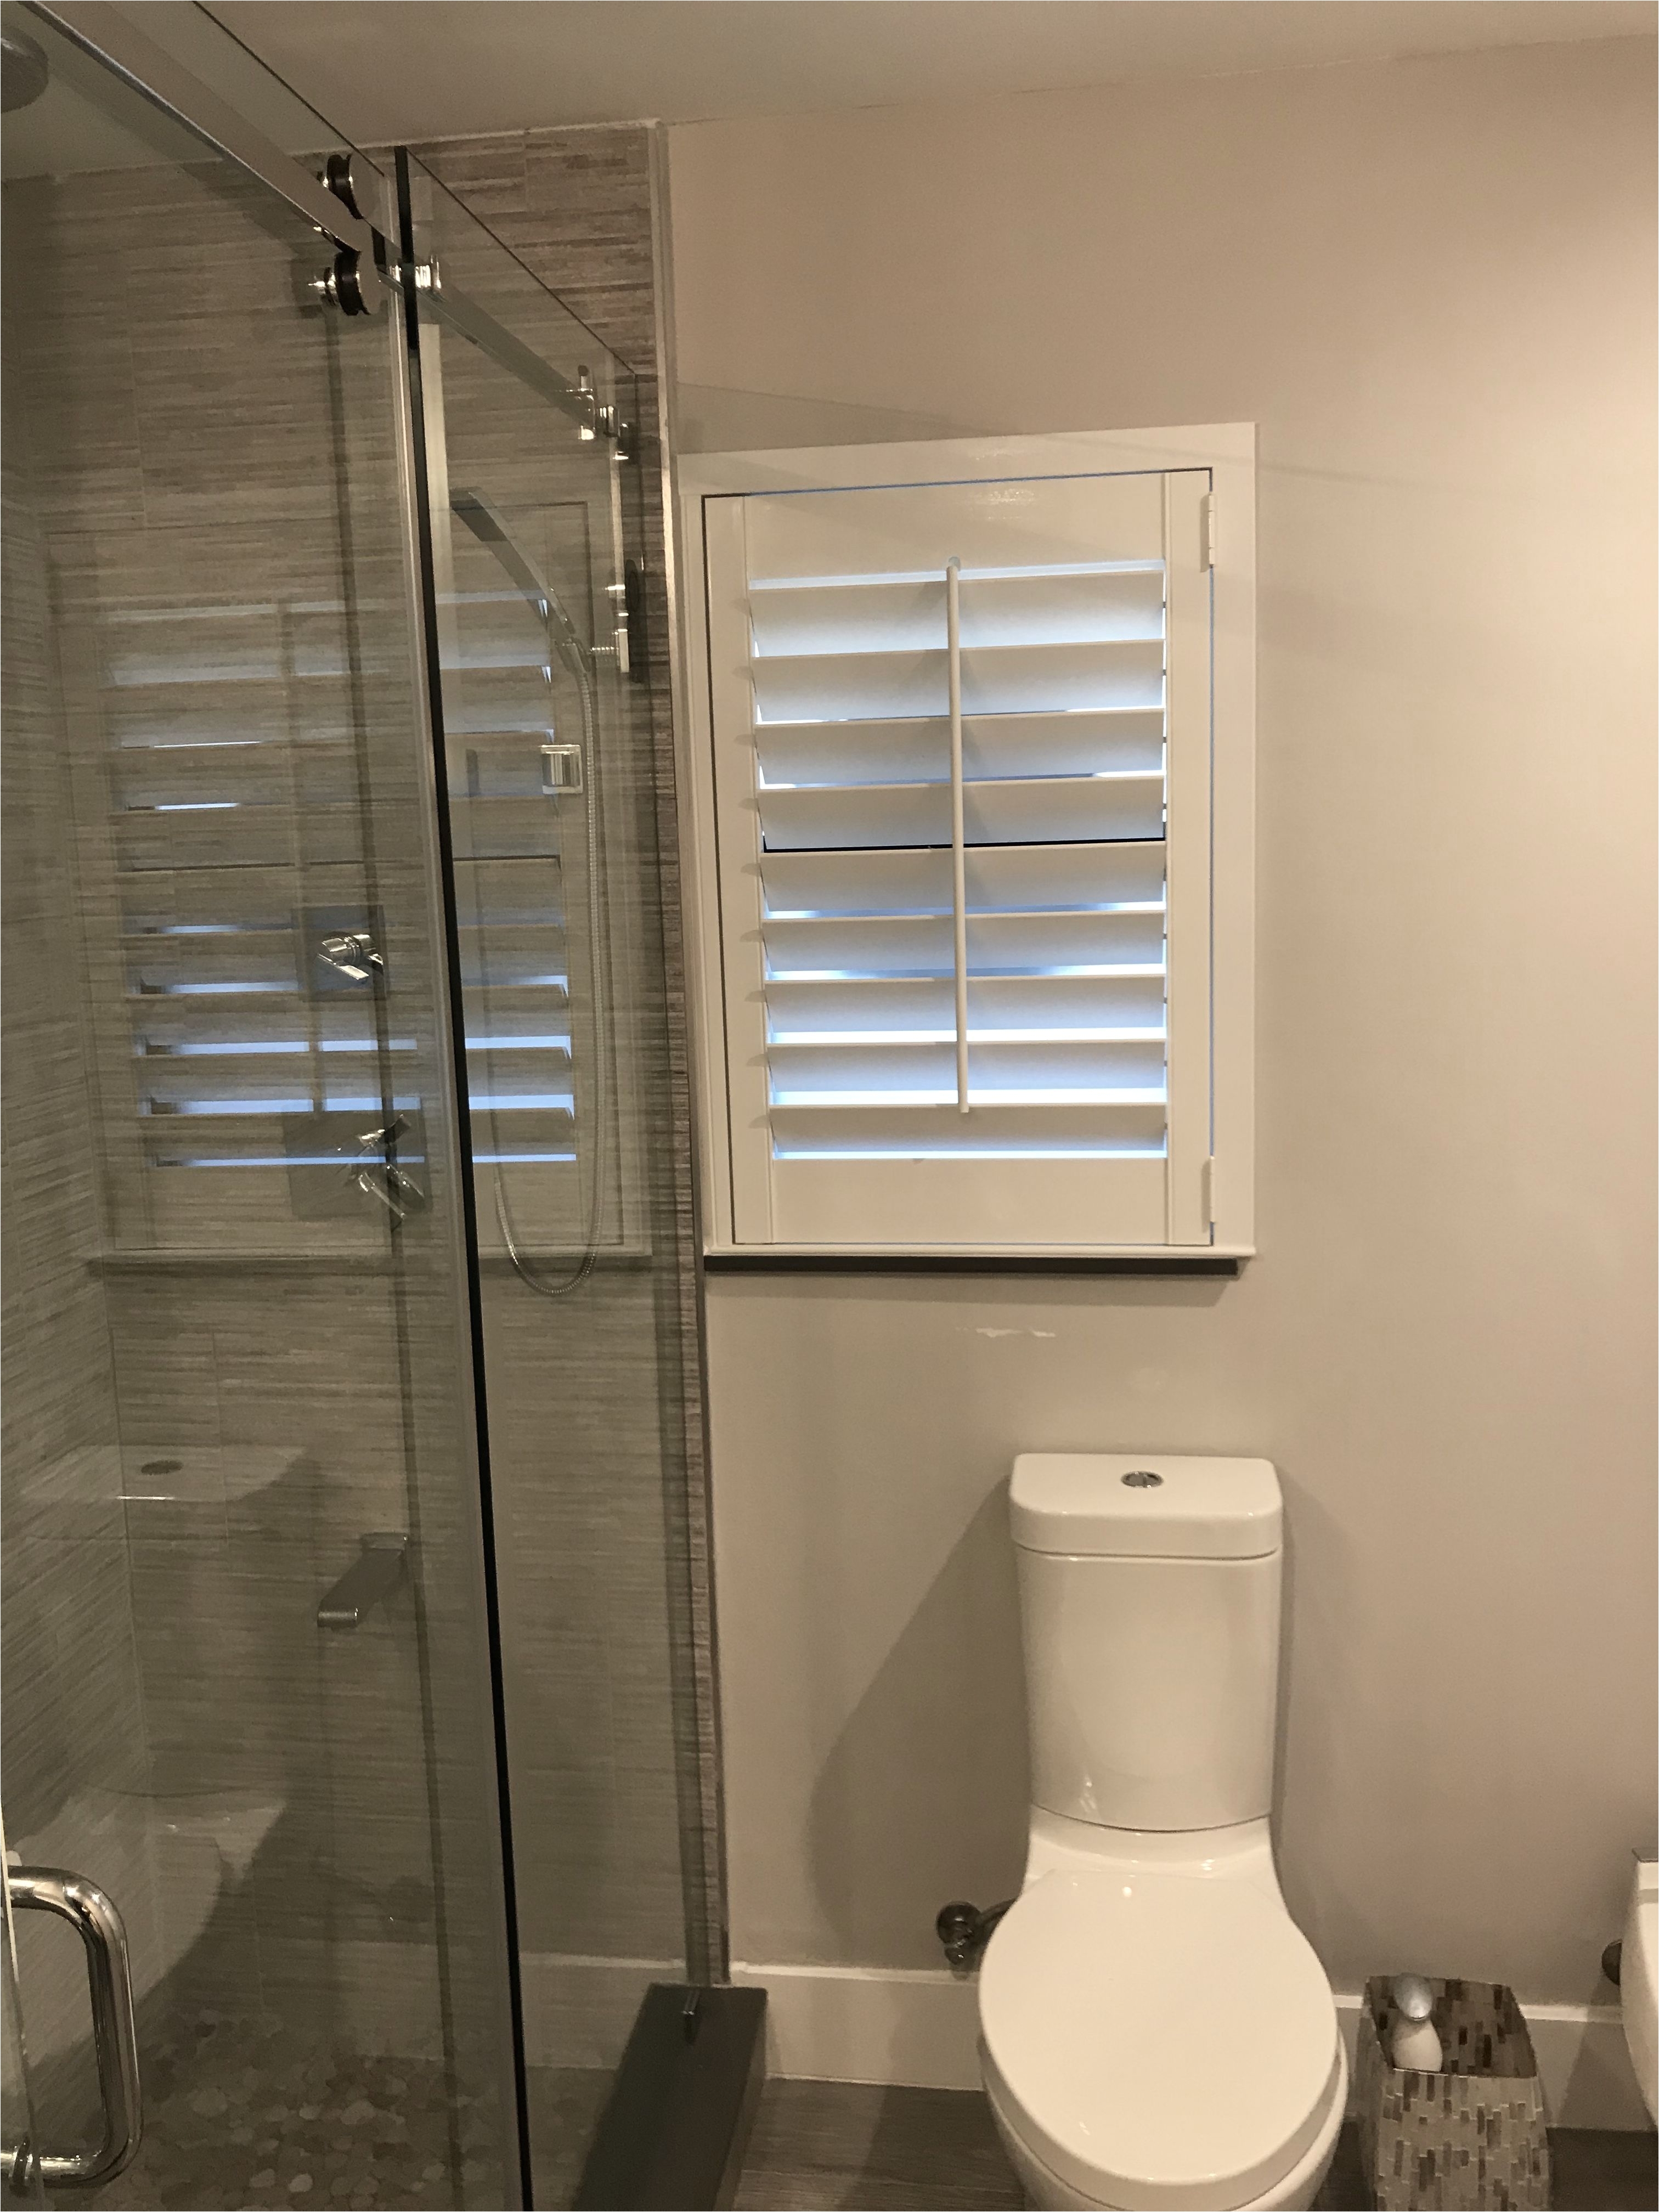 2 sided z frame with l fame and sill plantation shutter by elite decor miami bathroom